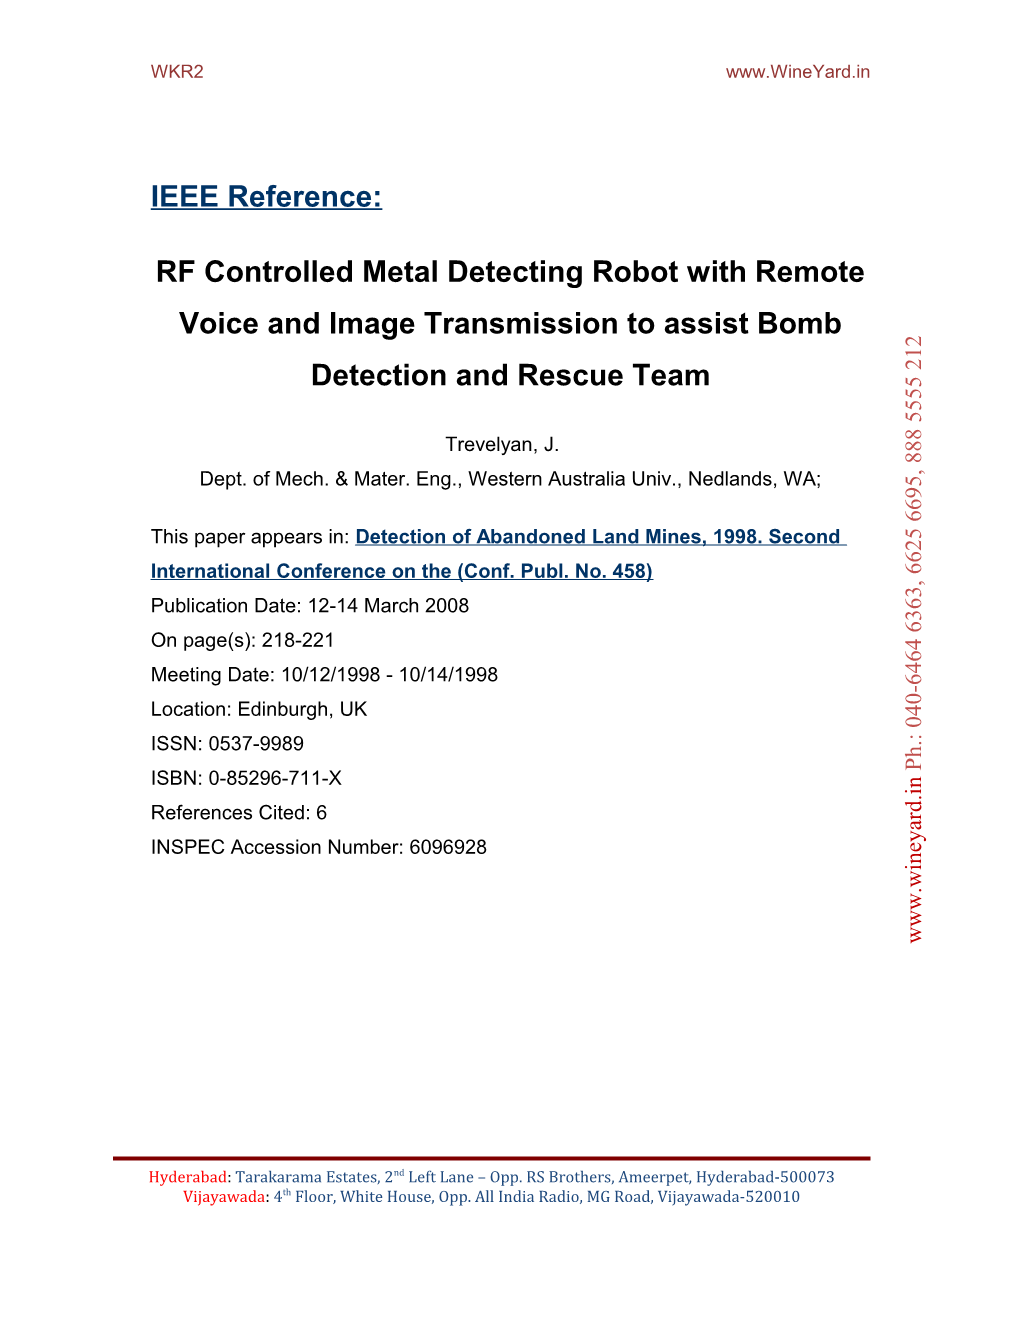 RF Controlled Metal Detecting Robot with Remote Voice and Image Transmission to Assist